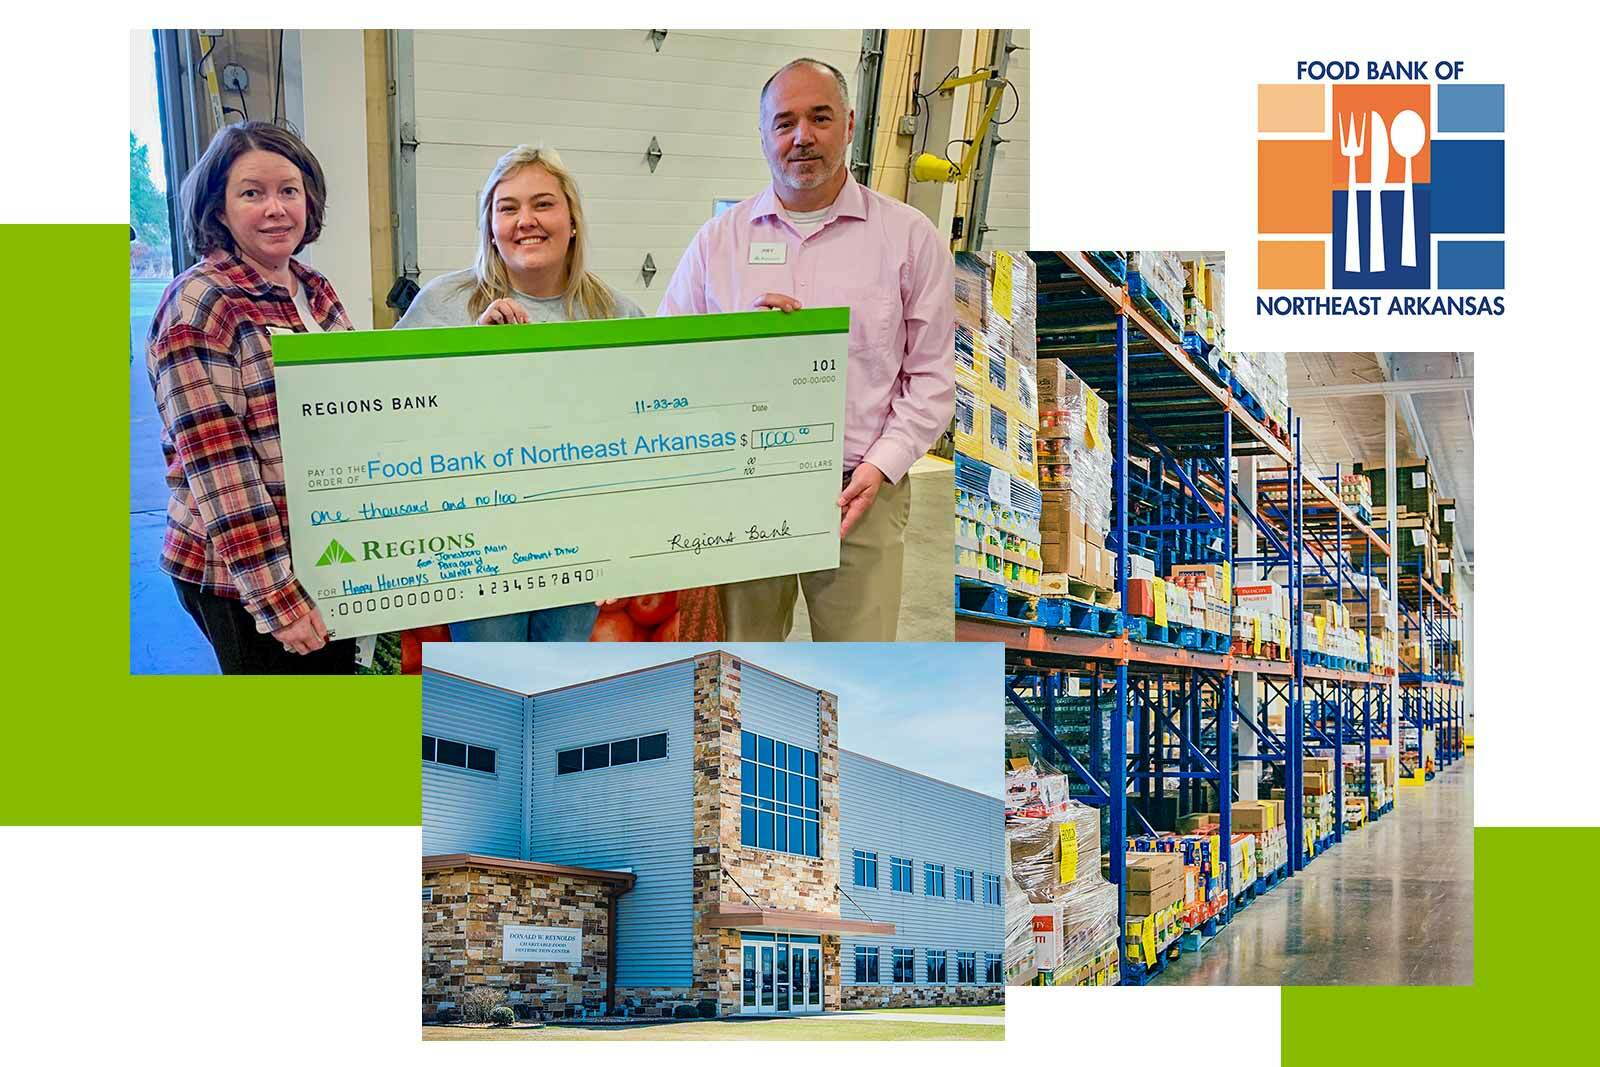 Photos of Food bank of Northeast Arkansas Check presentation, building exterior and interior photo of stockroom